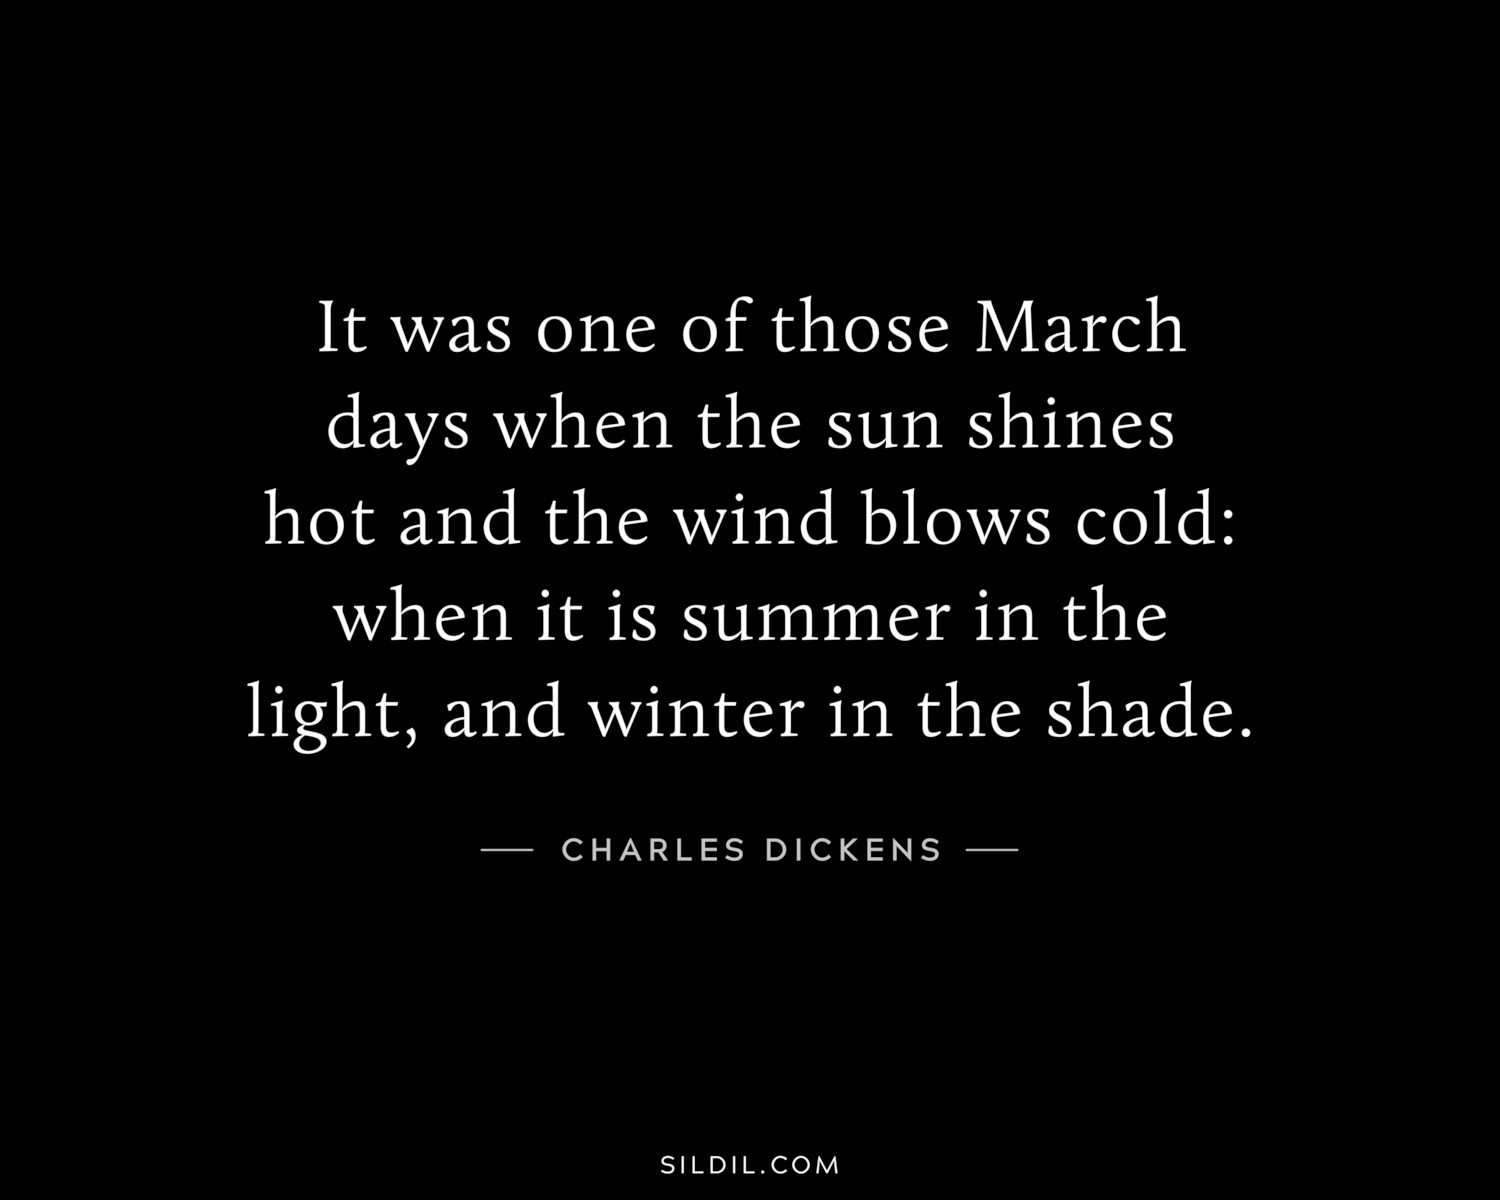 It was one of those March days when the sun shines hot and the wind blows cold: when it is summer in the light, and winter in the shade.